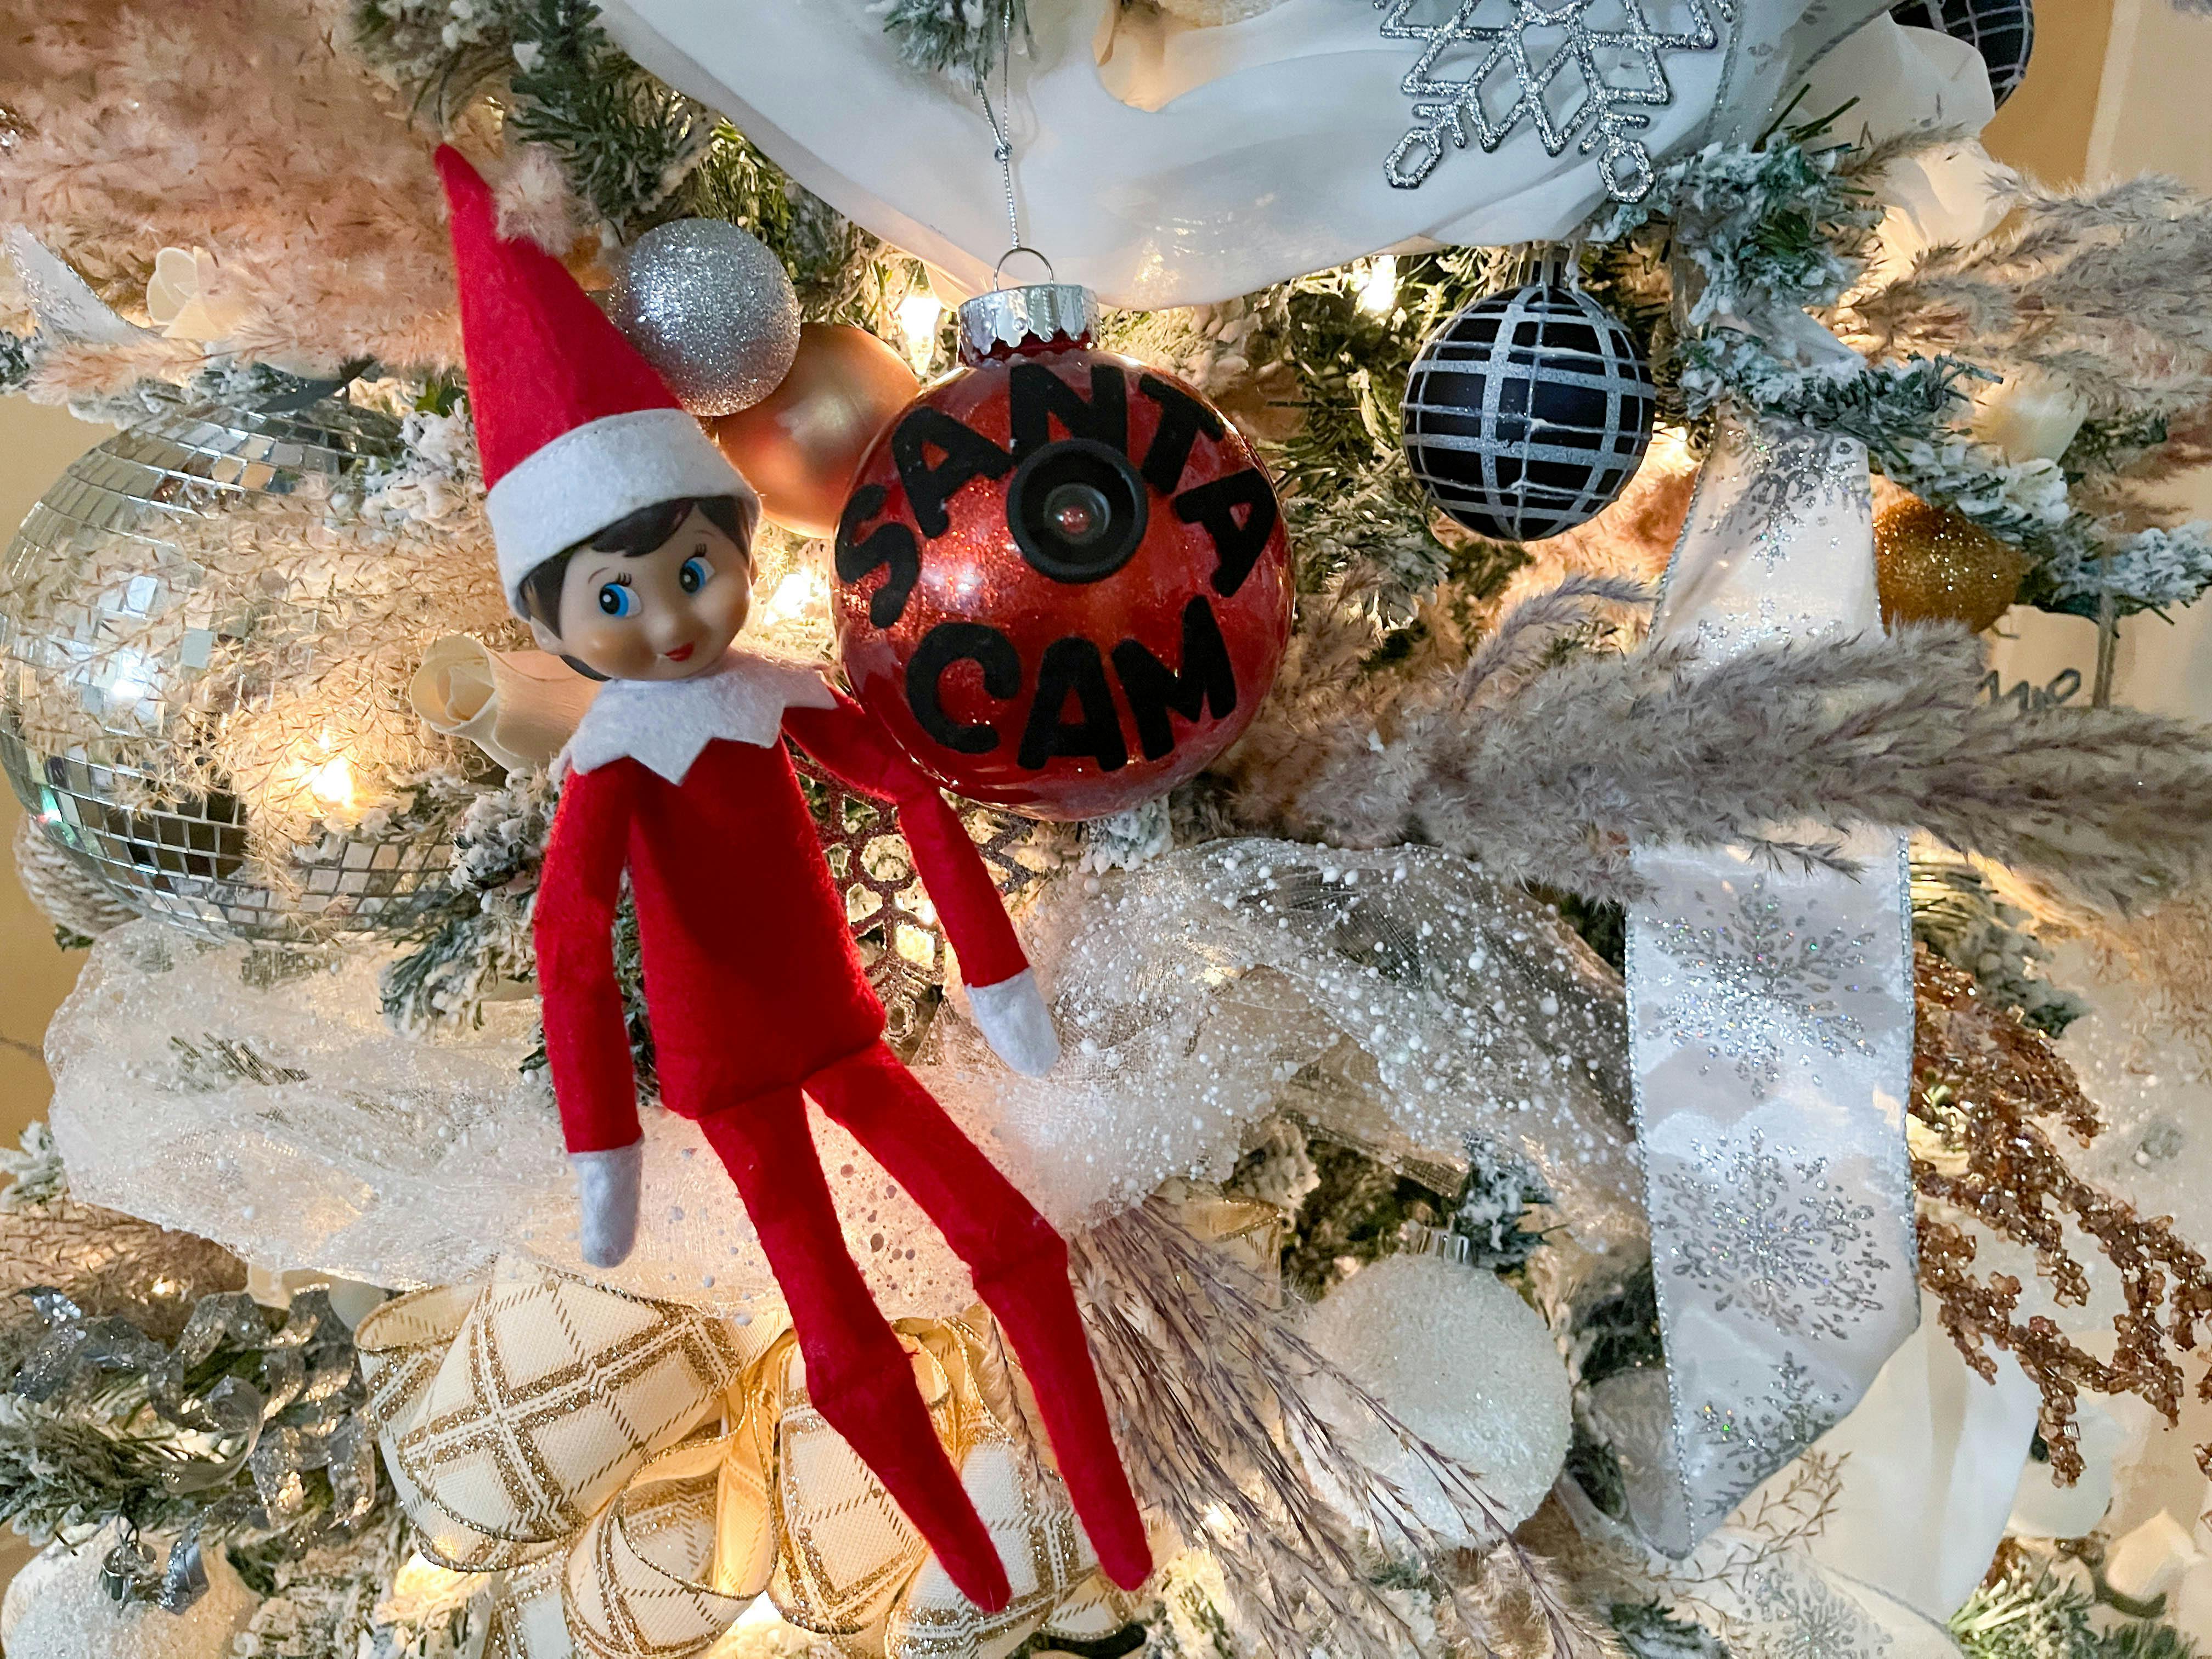 50 Elf on the Shelf Ideas That Are Cheap & Easy - The Krazy Coupon